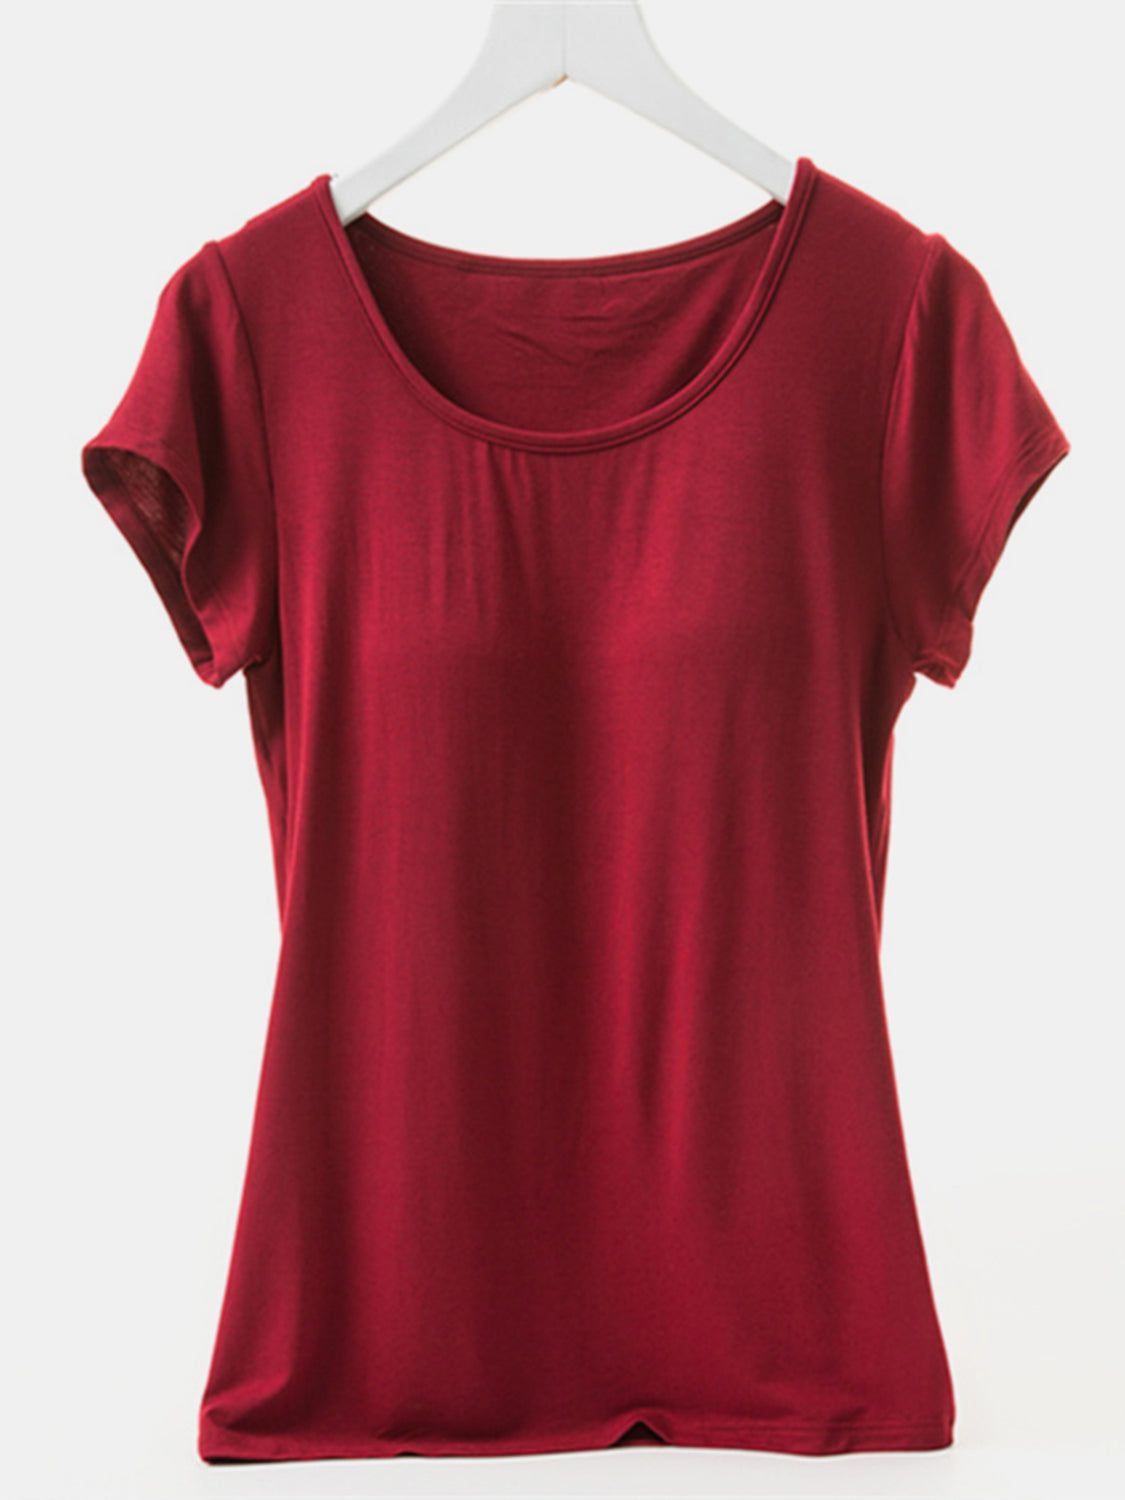 Brown Round Neck Short Sleeve T-Shirt with Bra Sentient Beauty Fashions Apparel & Accessories